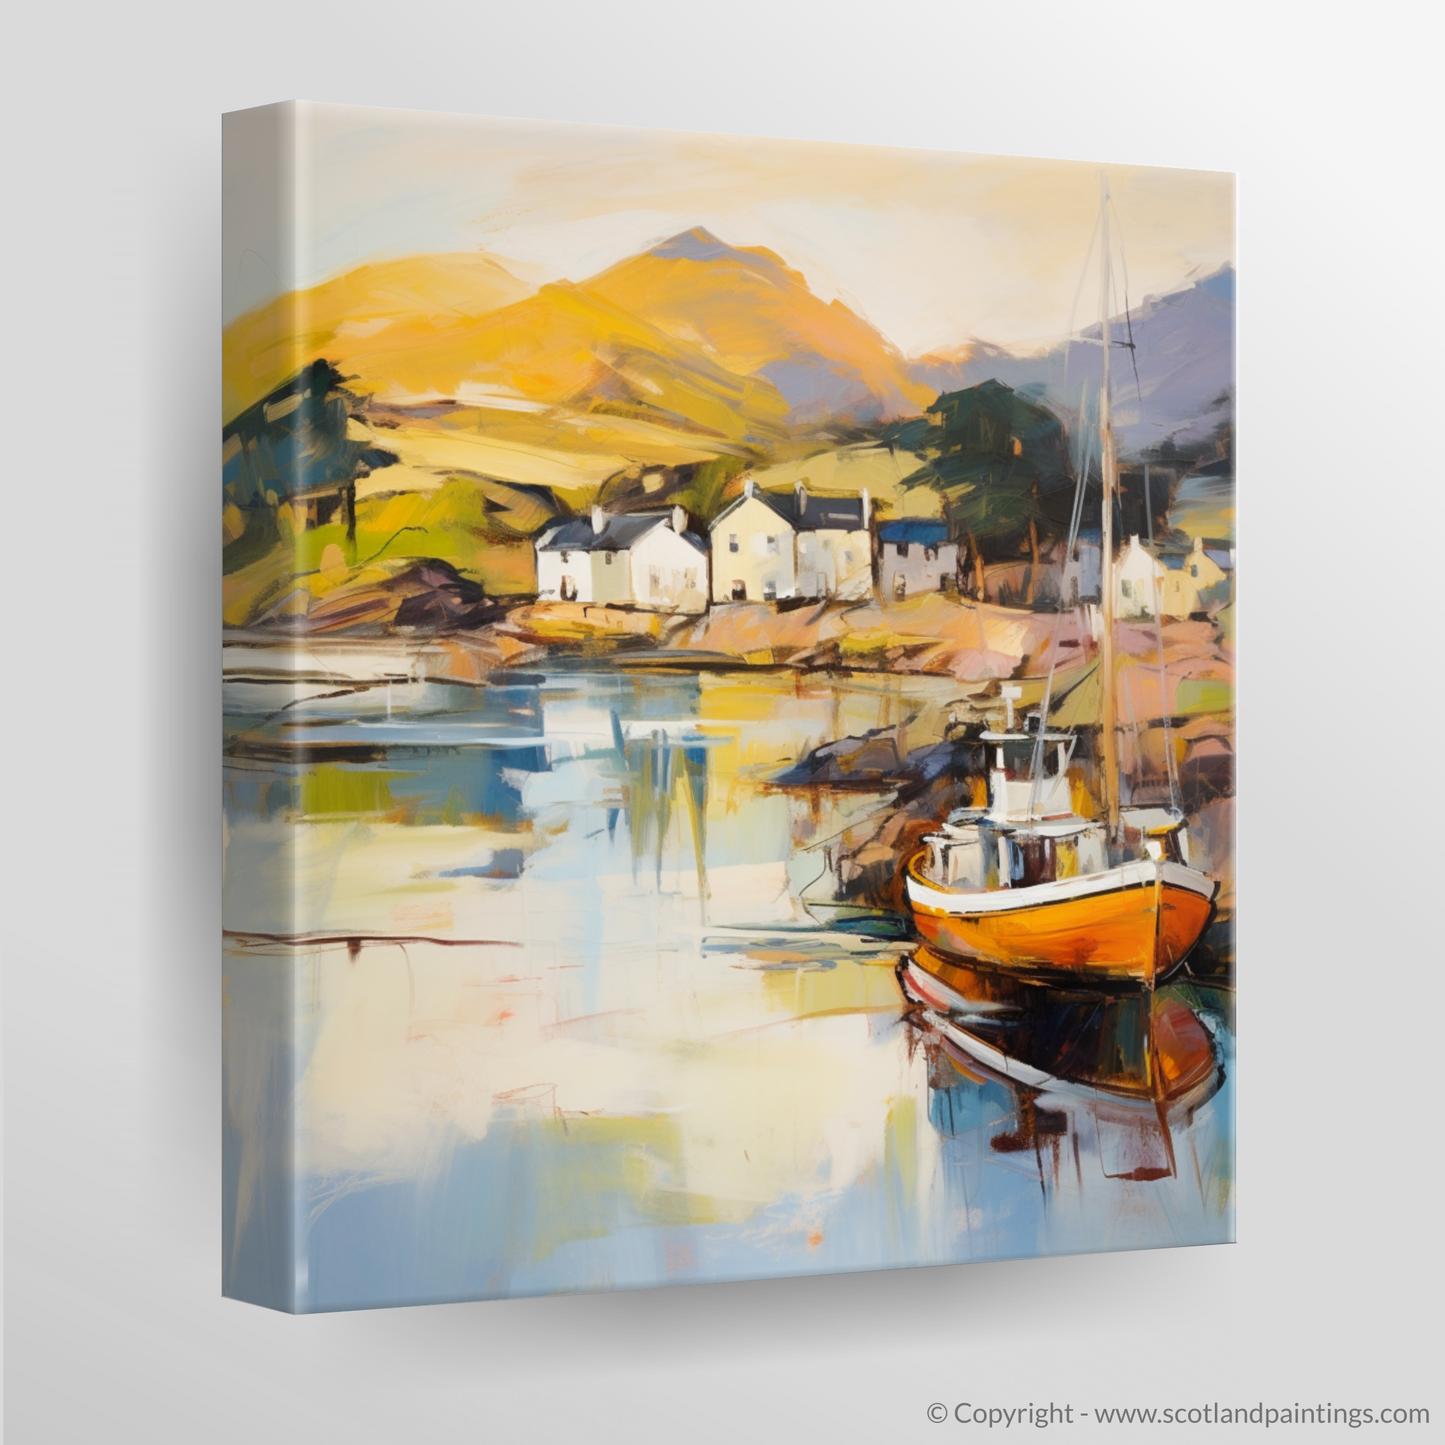 Plockton Harbour Enchantment: An Abstract Expressionist Ode to Scottish Serenity